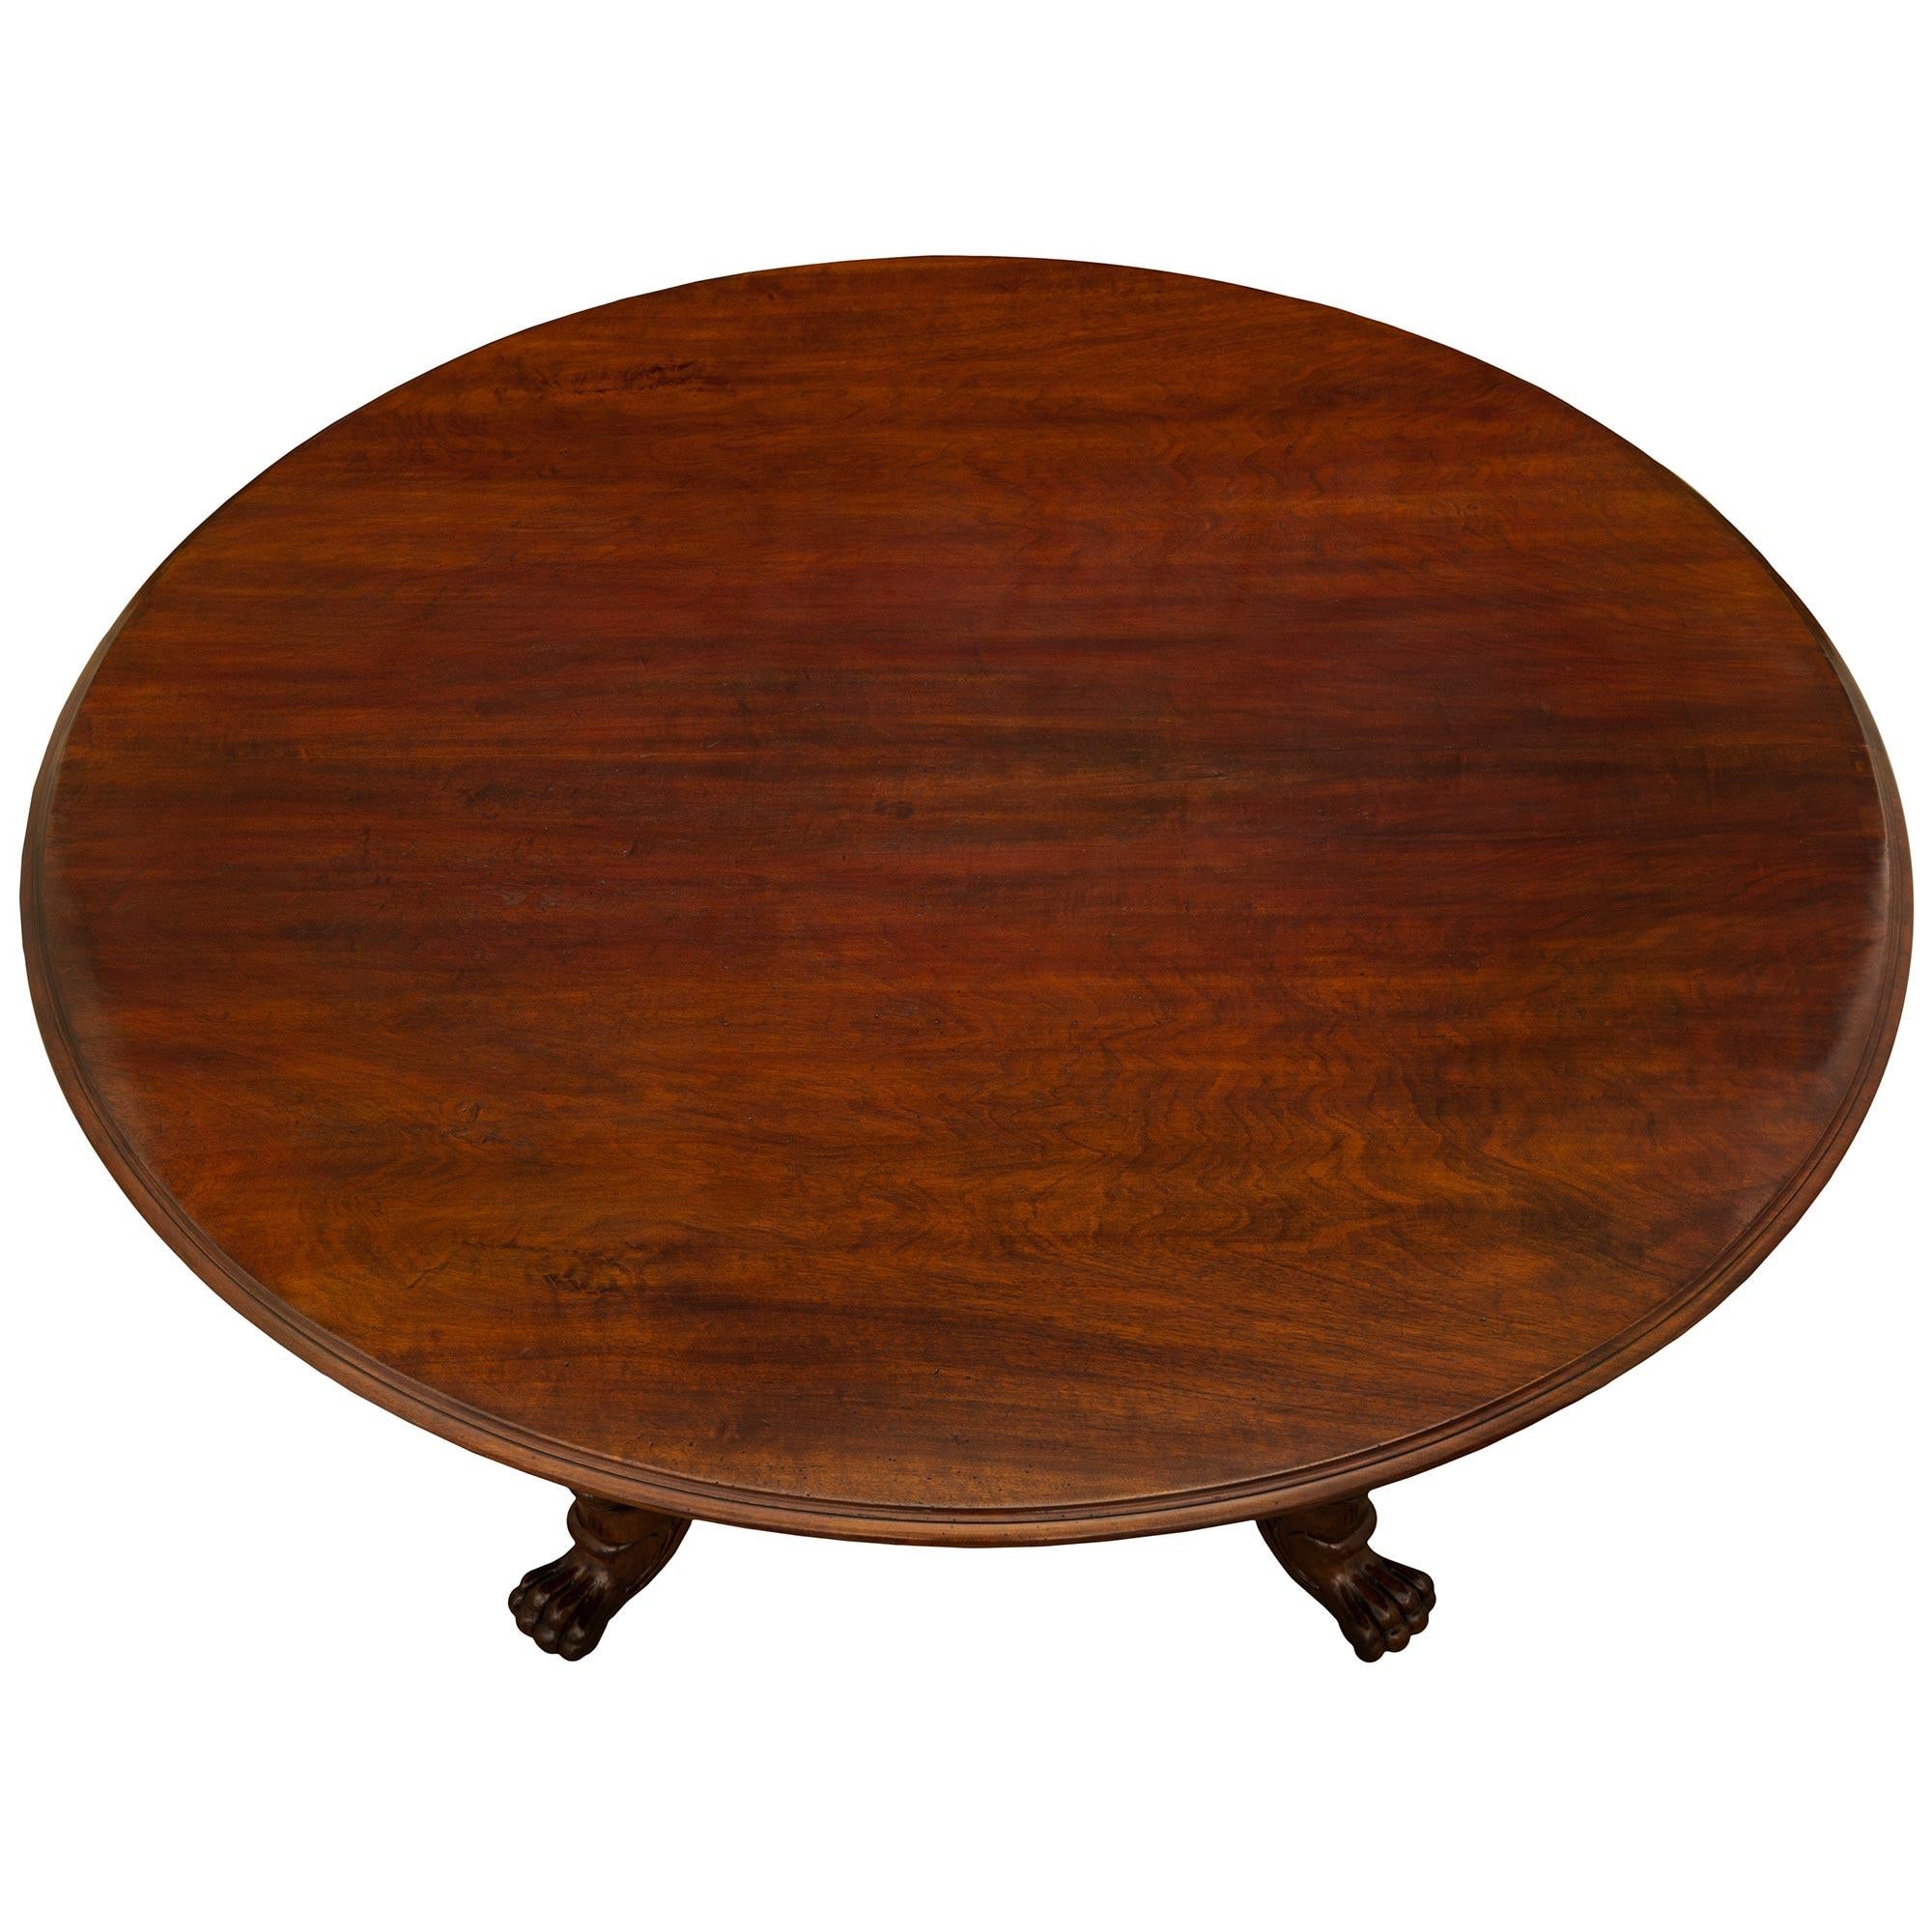 Italian 19th Century Genovese St. Charles X Period Walnut Center/Dining Table For Sale 9